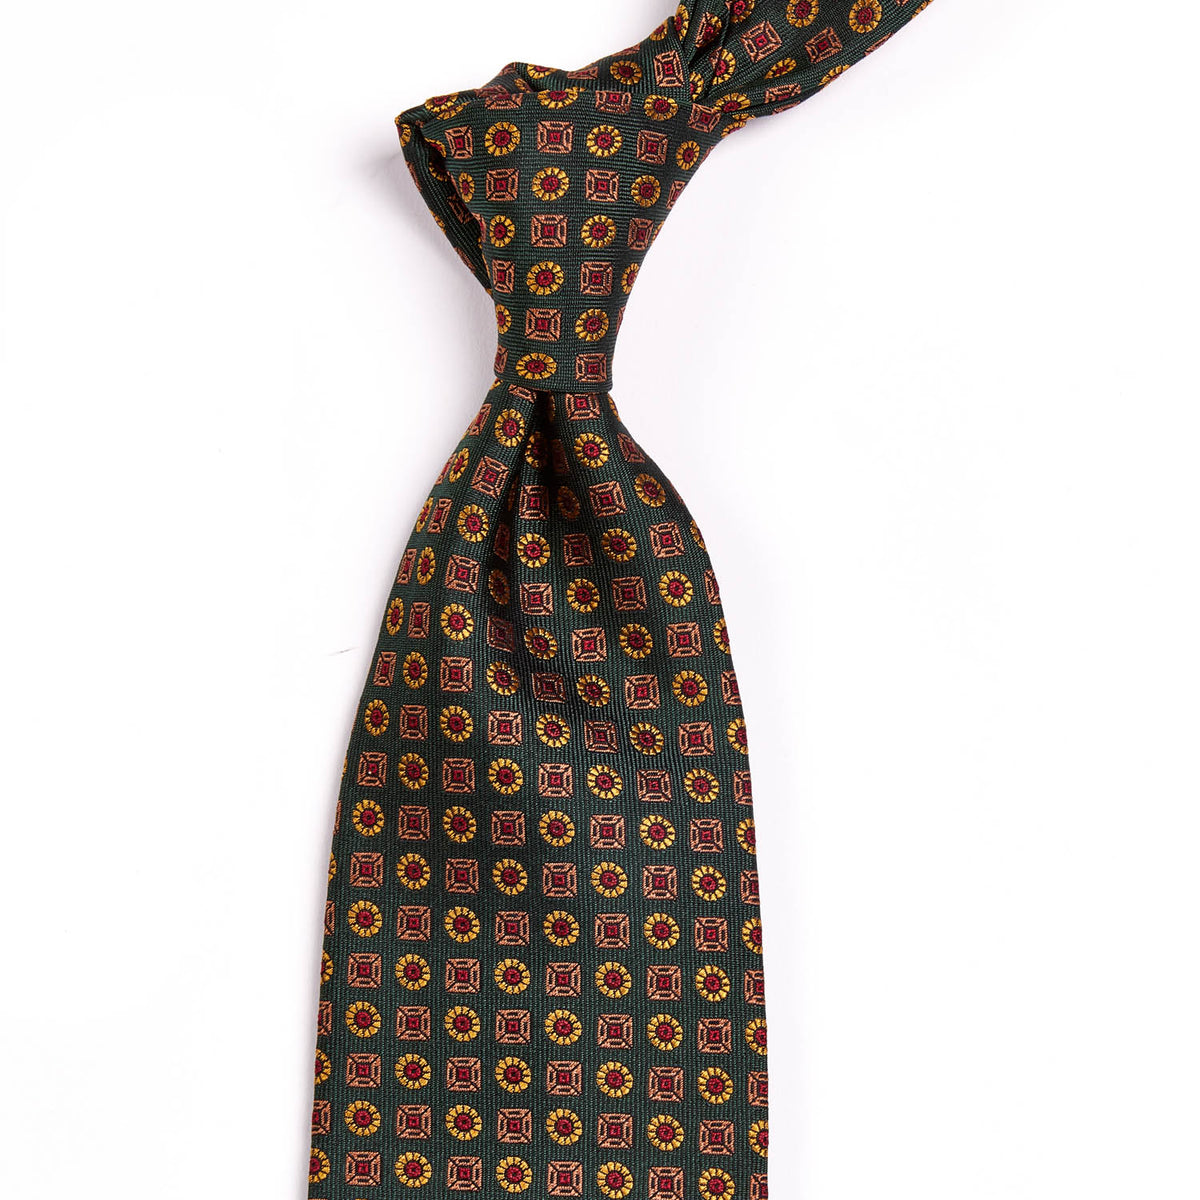 A high-quality, handmade Sovereign Grade Tartan Floral Jacquard Tie, 150 cm with a red, green and yellow pattern from KirbyAllison.com.